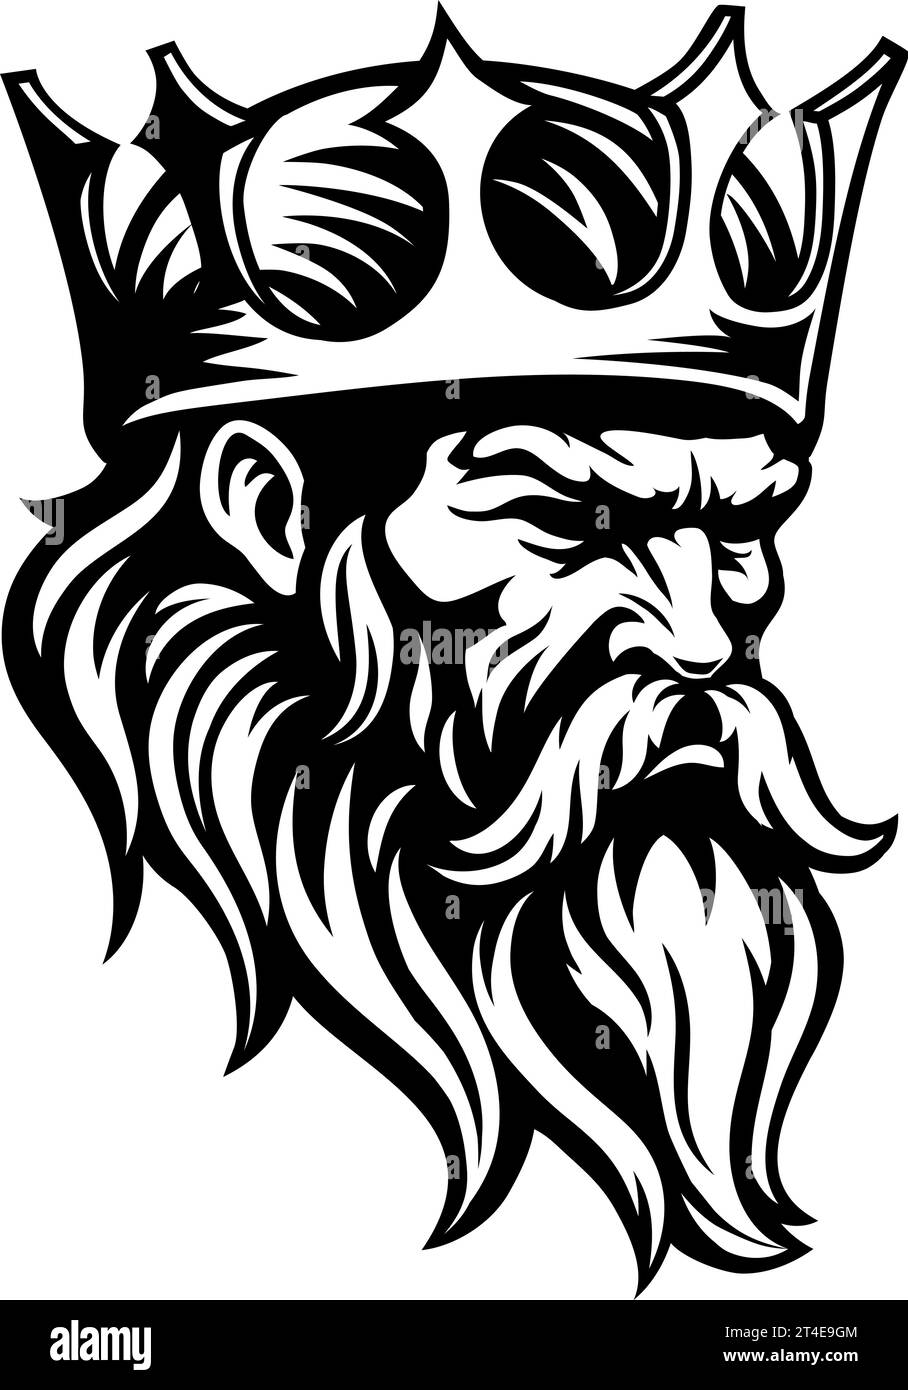 King Medieval Crown Head Man Mascot Face Icon Stock Vector